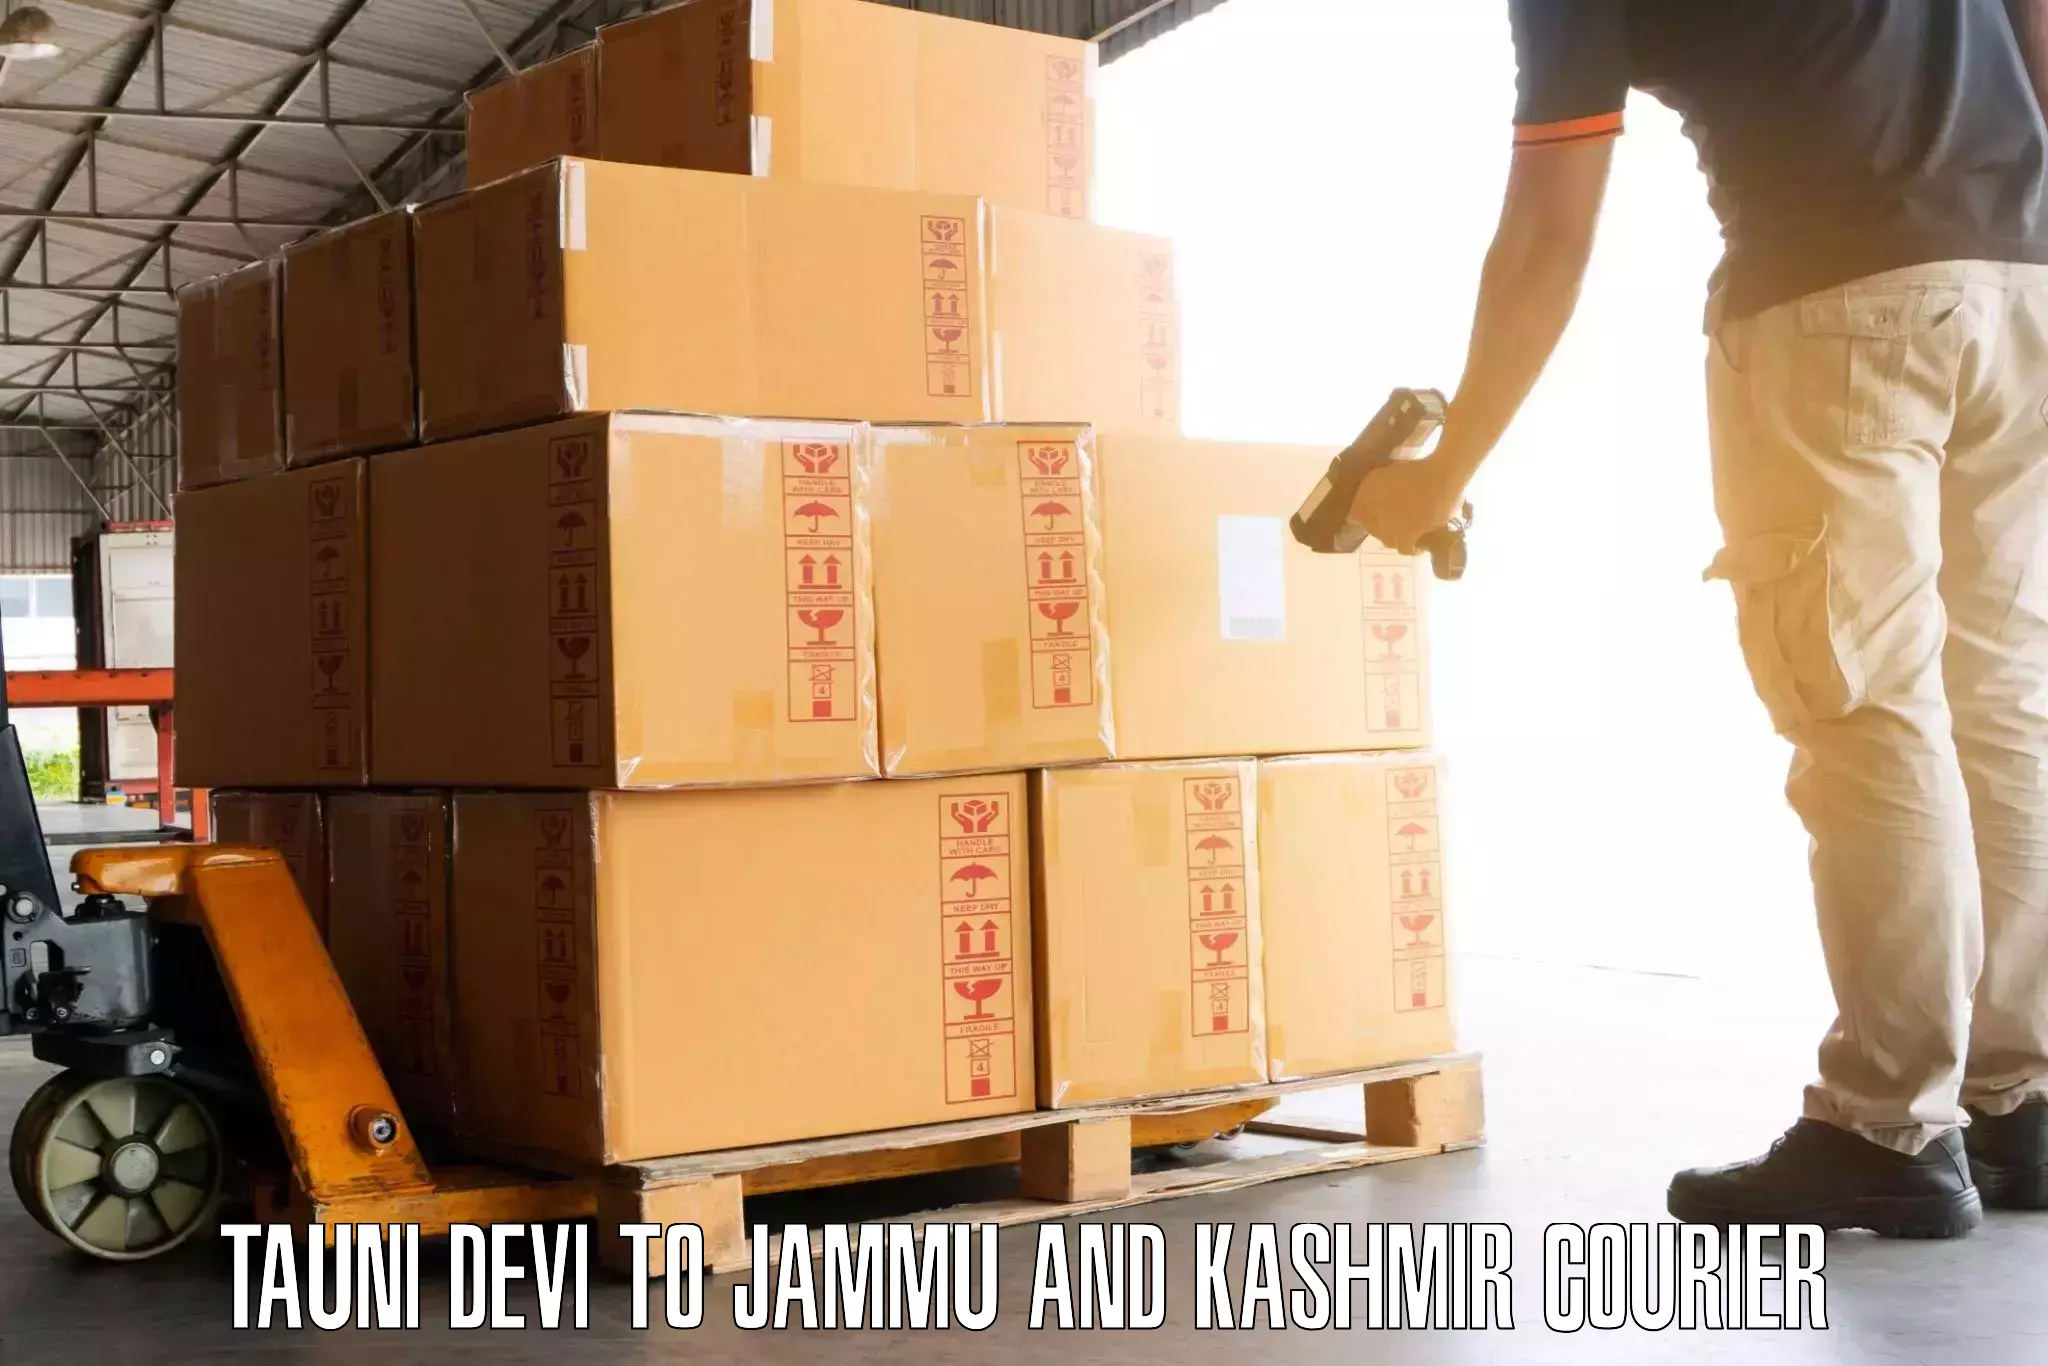 Business luggage transport in Tauni Devi to Jammu and Kashmir